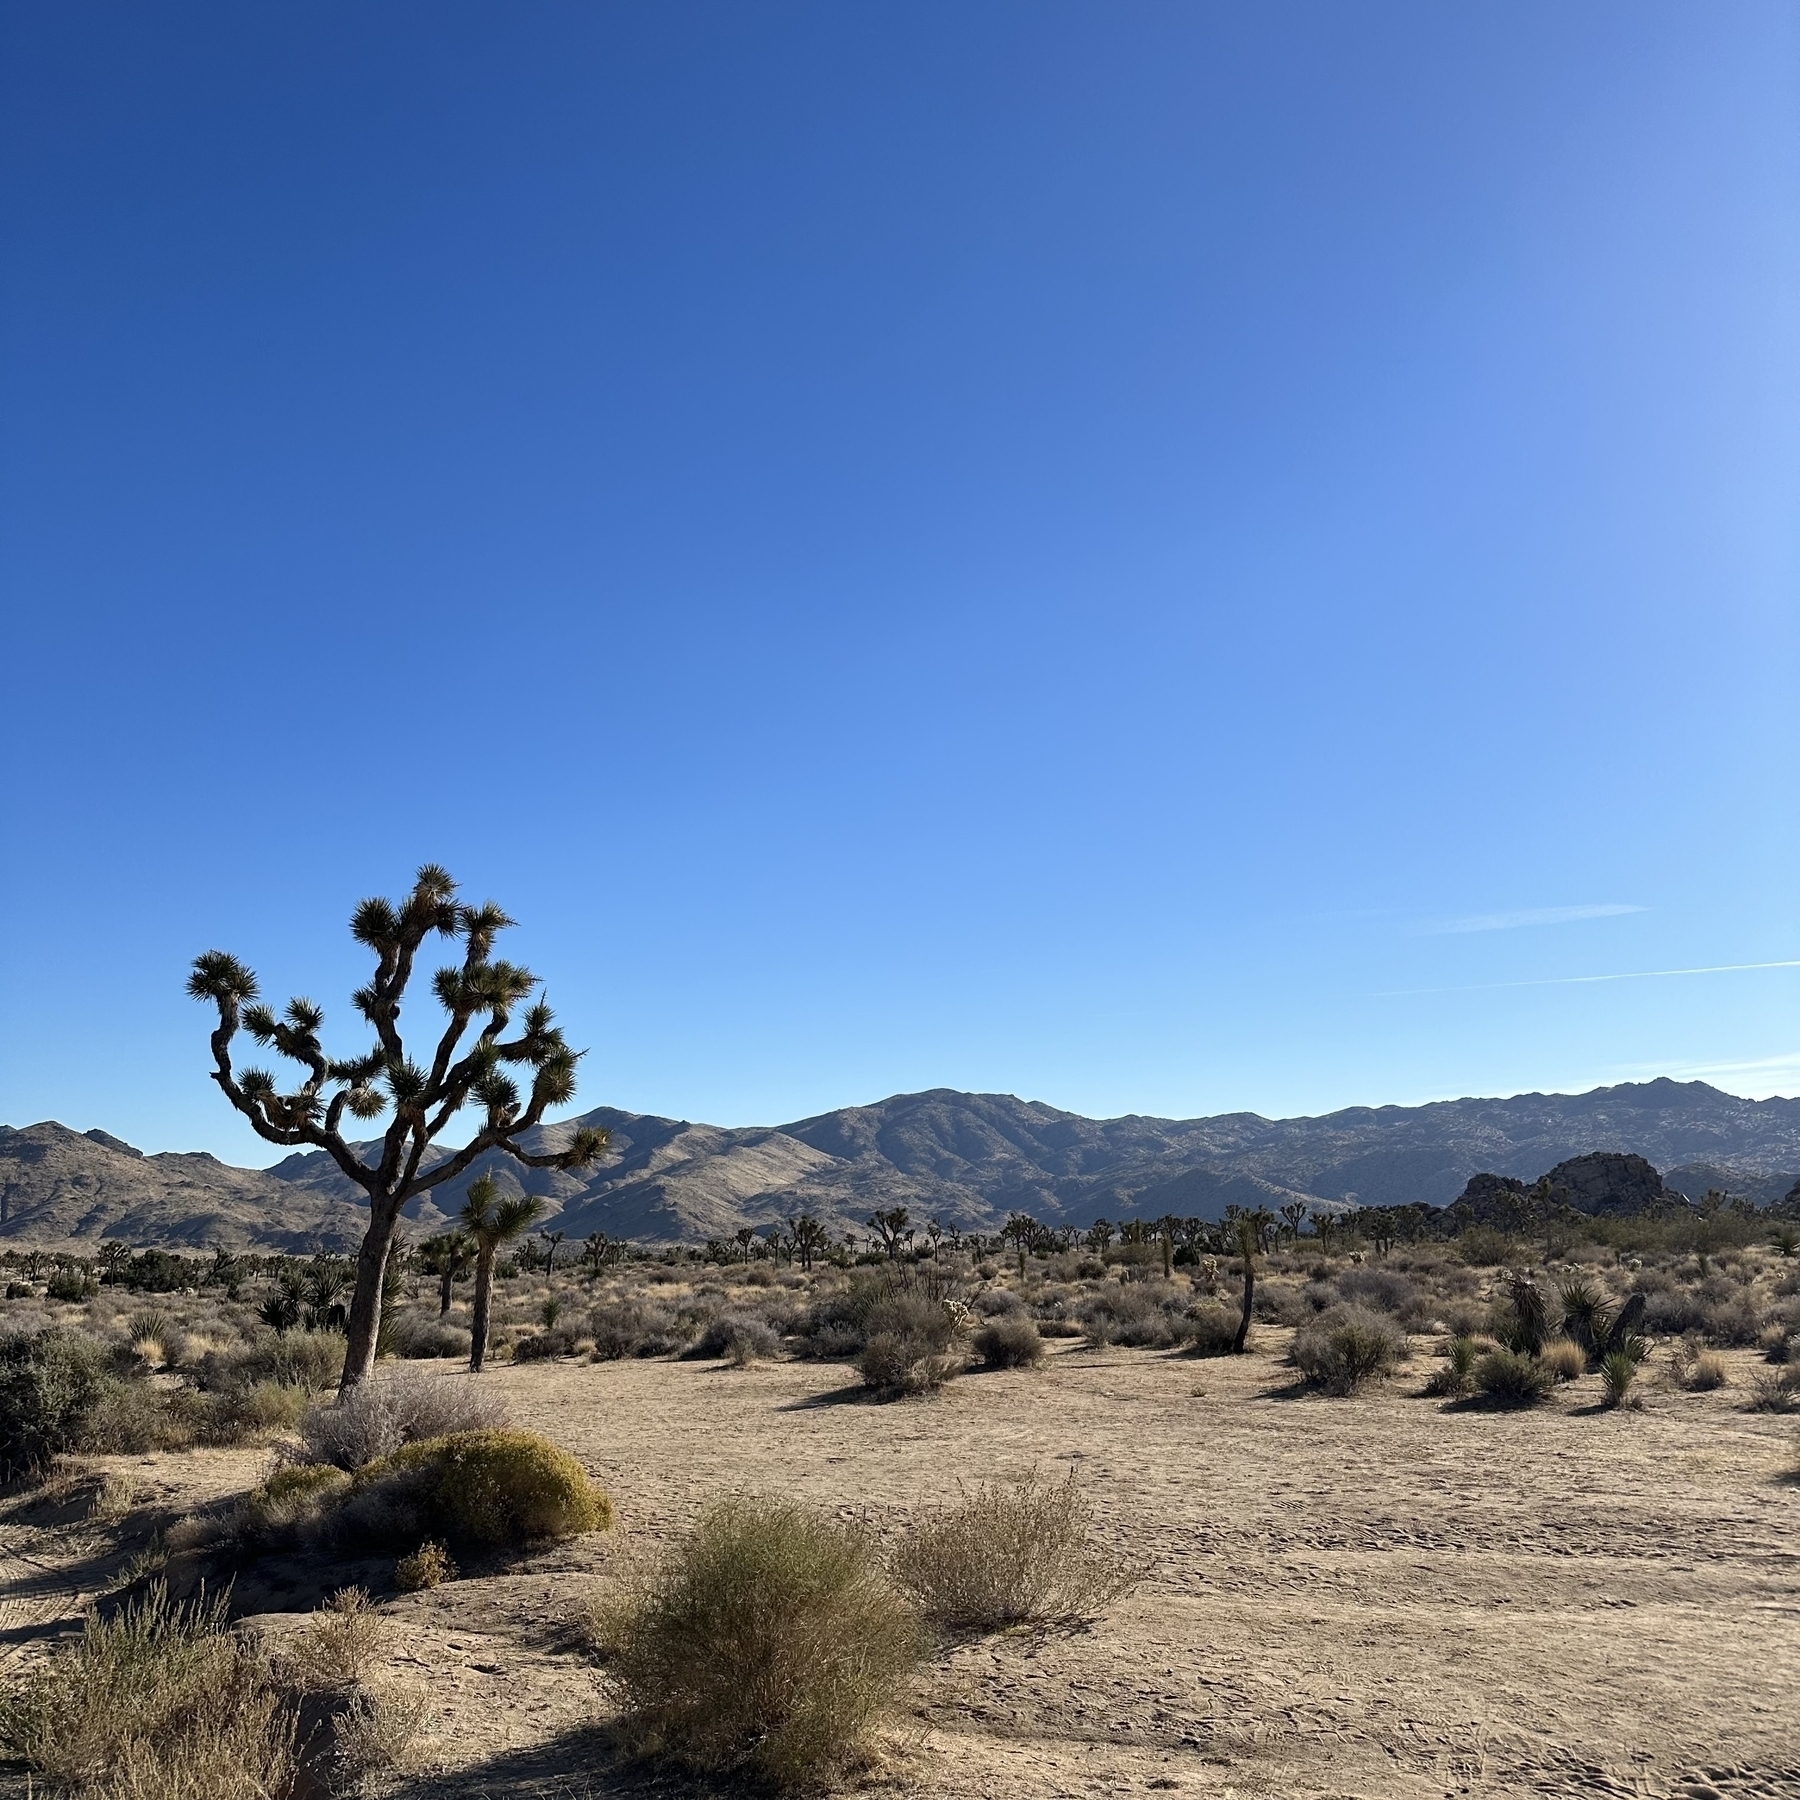 Yucca tree and mountains in the desert.